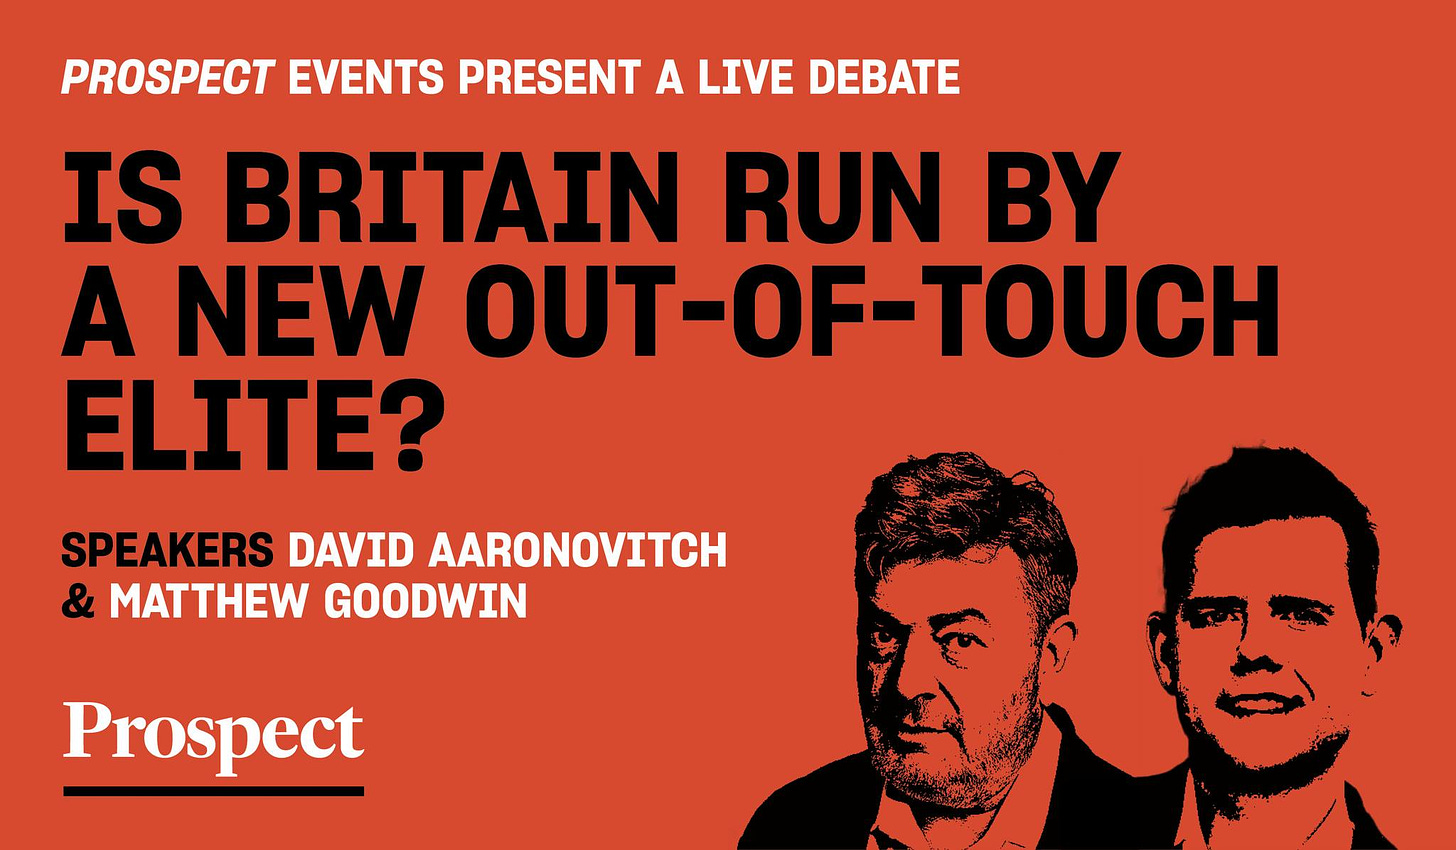 May be an image of 1 person and text that says "PROSPECT EVENTS PRESENT A LIVE DEBATE IS BRITAIN RUN BY A NEW OUT-OF-TOUCH ELITE? n SPEAKERS DAVID AARONOVITCH MATTHEW GOODWIN Prospect"